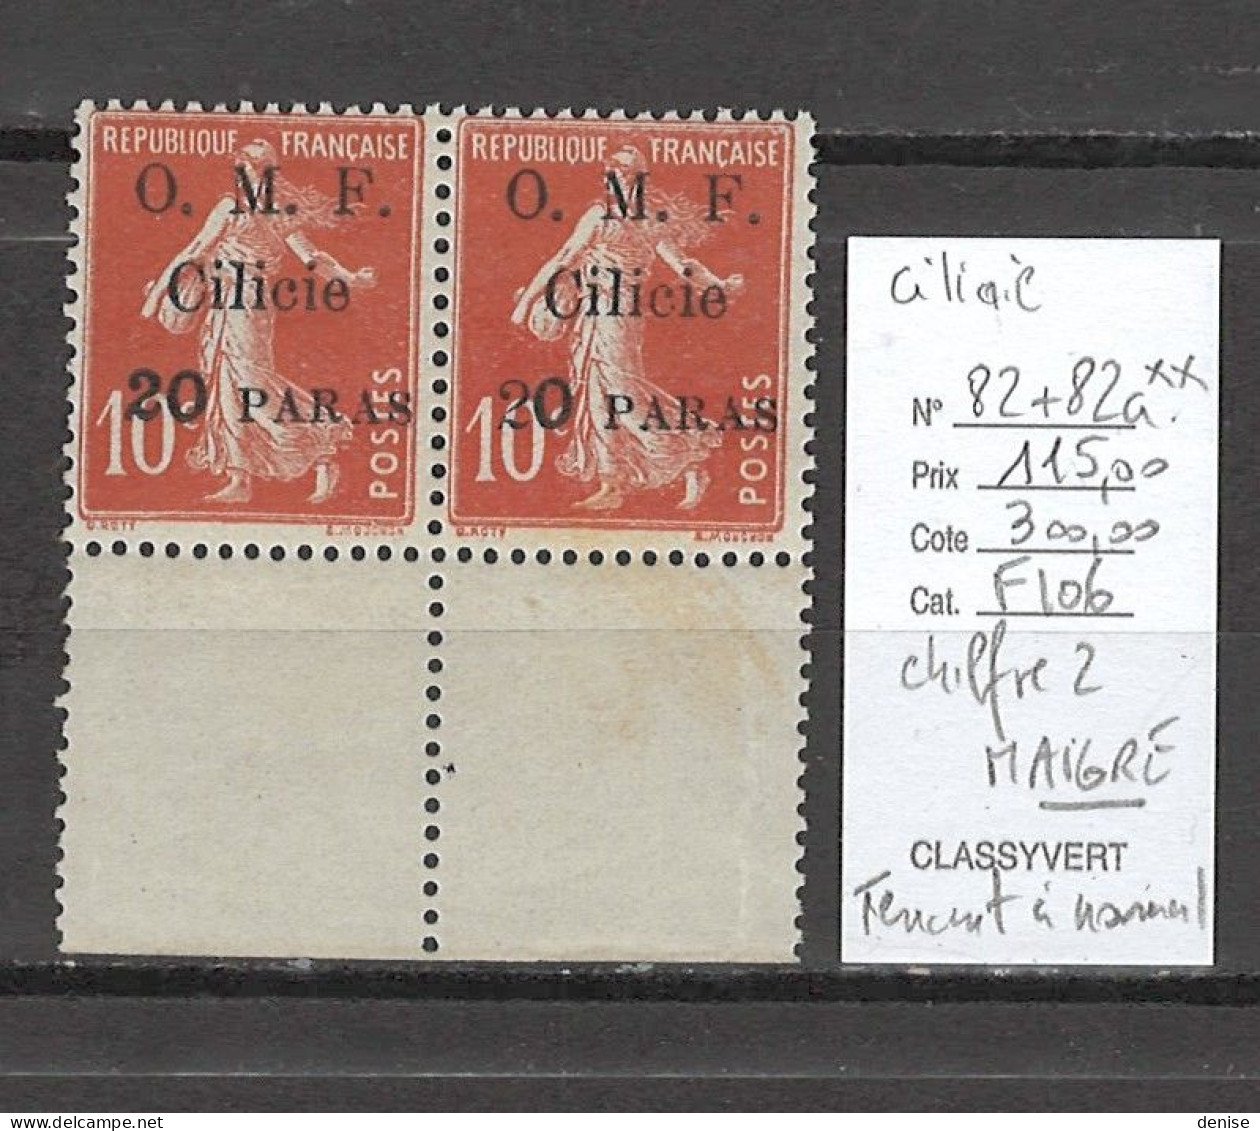 Cilicie - Yvert 82a** - VARIETE CHIFFRE 2 MAIGRE - Semeuse 10 Cts Rouge - Unused Stamps